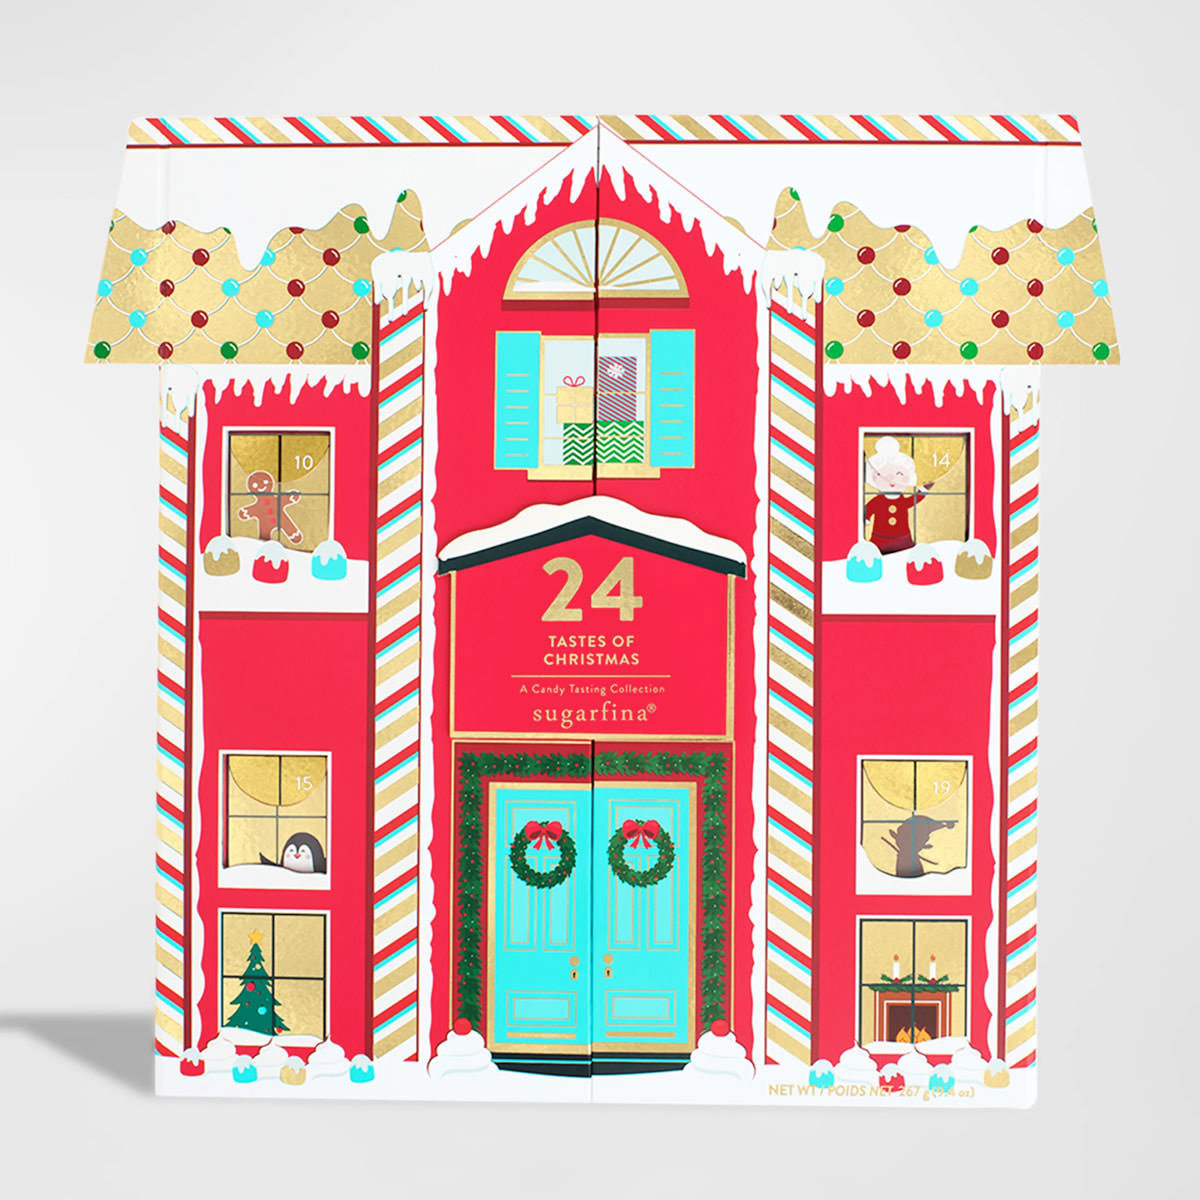 This Is the World's Most Expensive Advent Calendar